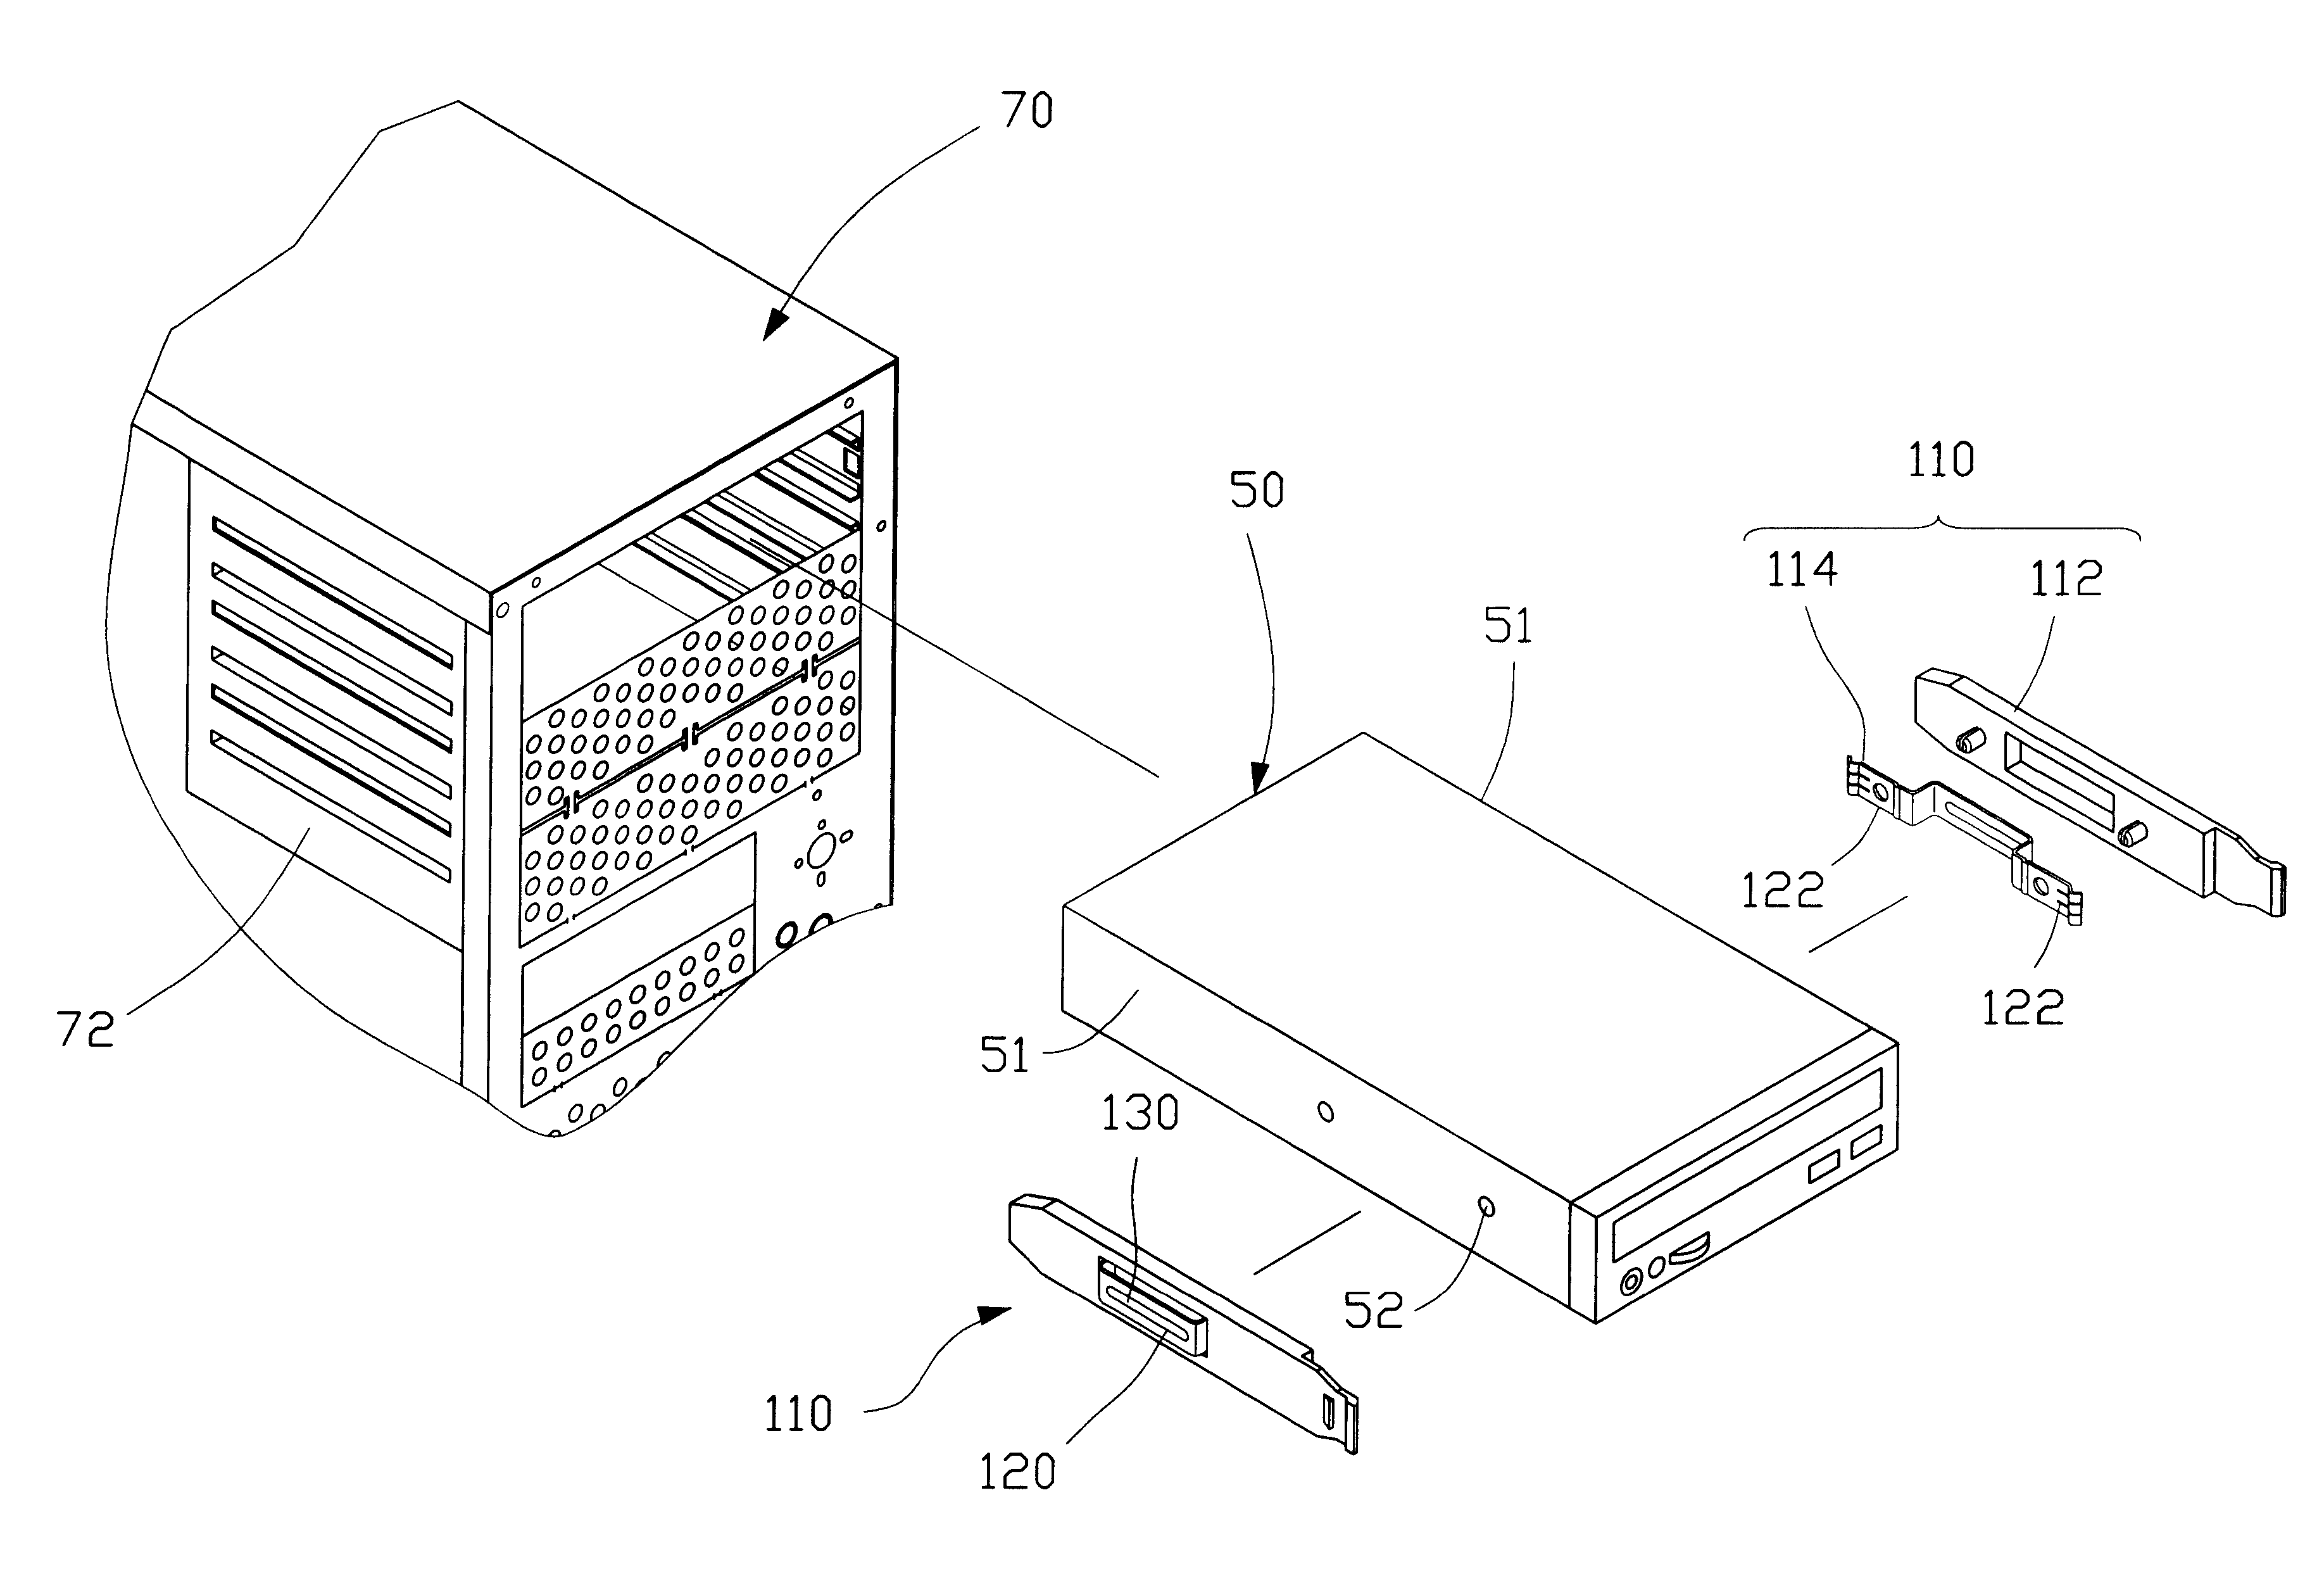 Mounting device for mounting a data storage device